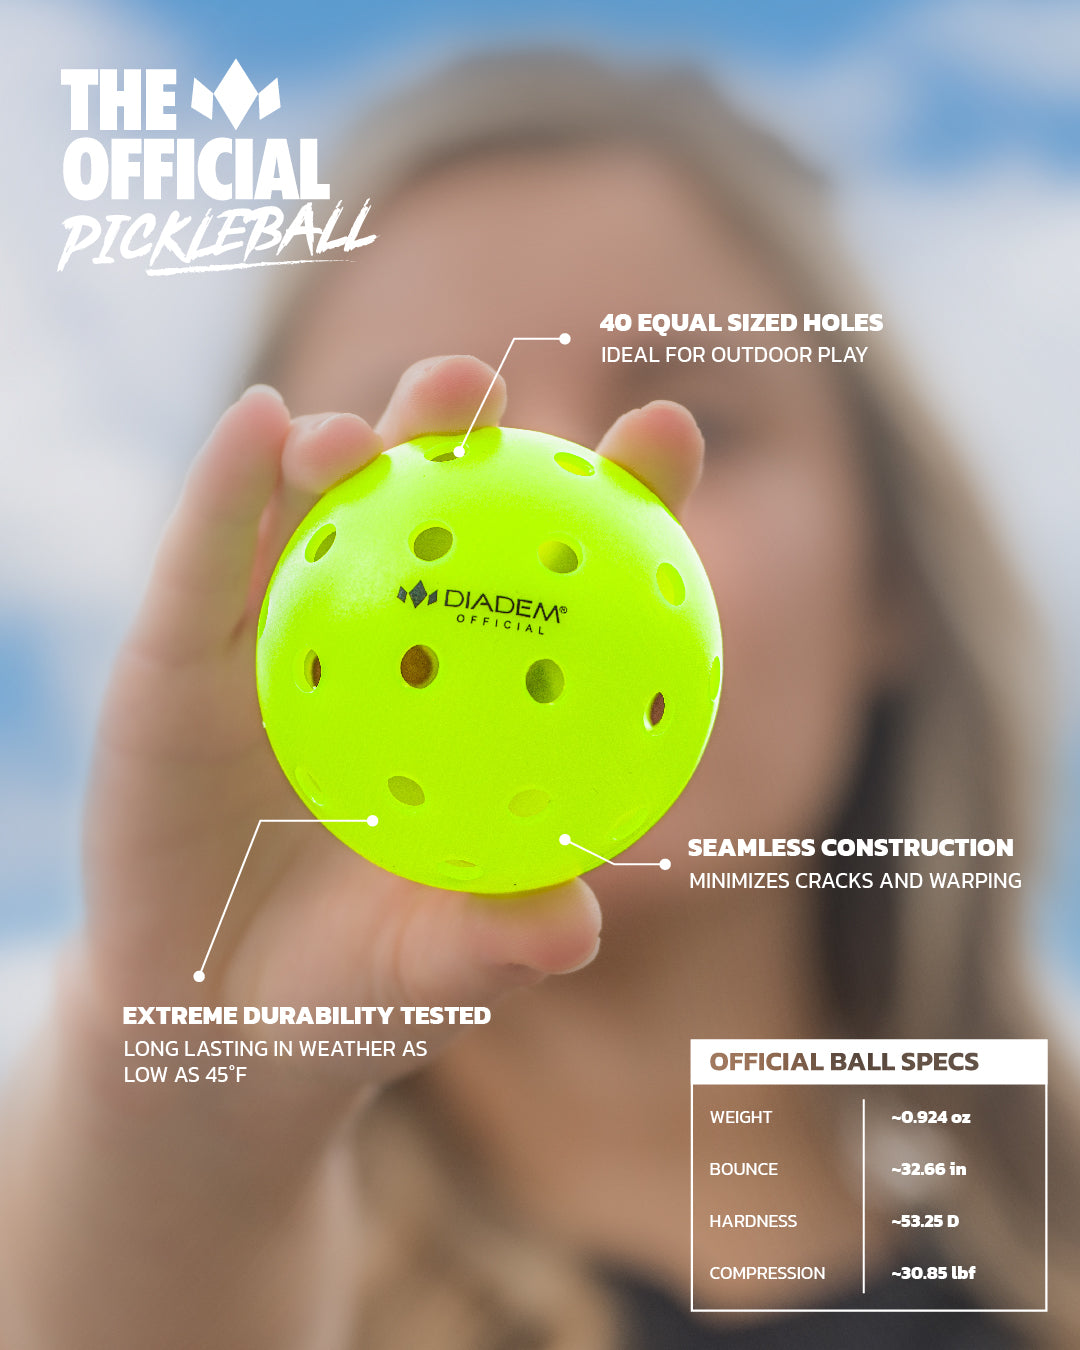 The Official Pickleball